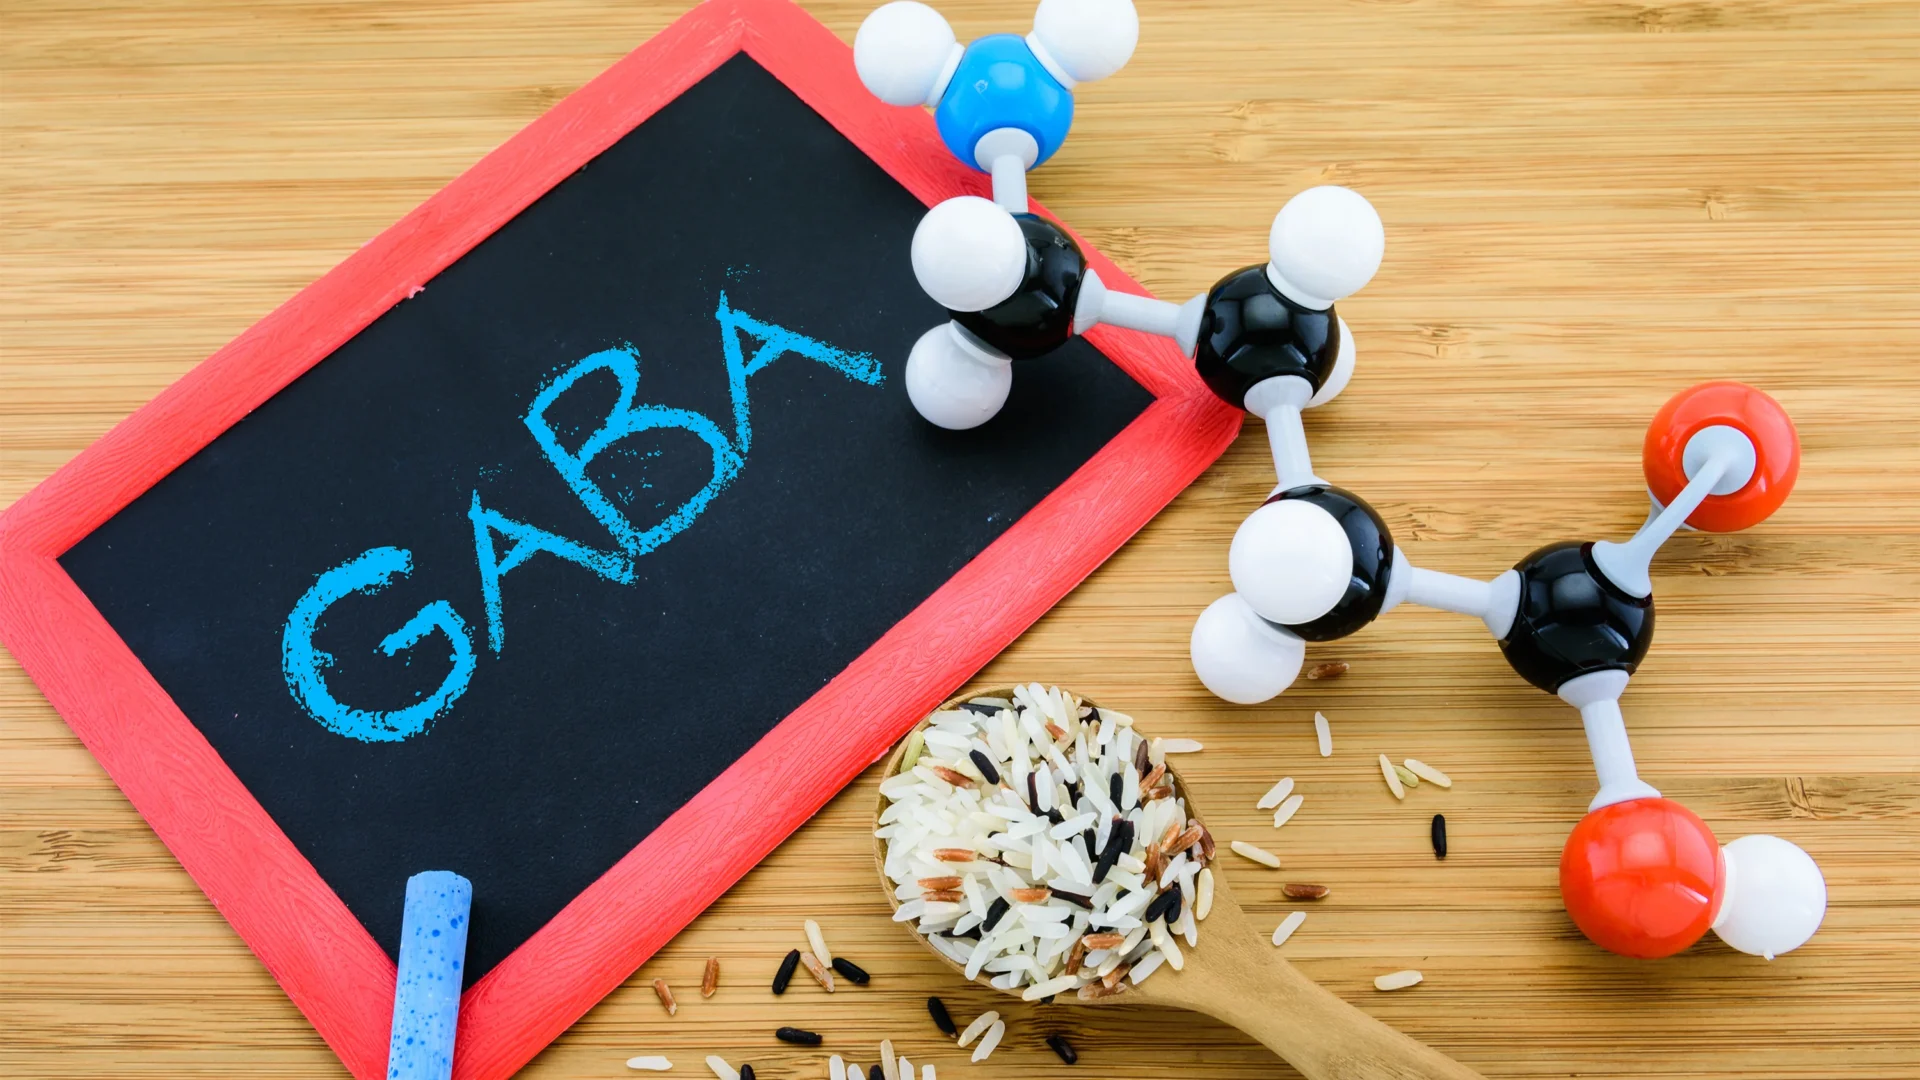 What is GABA?